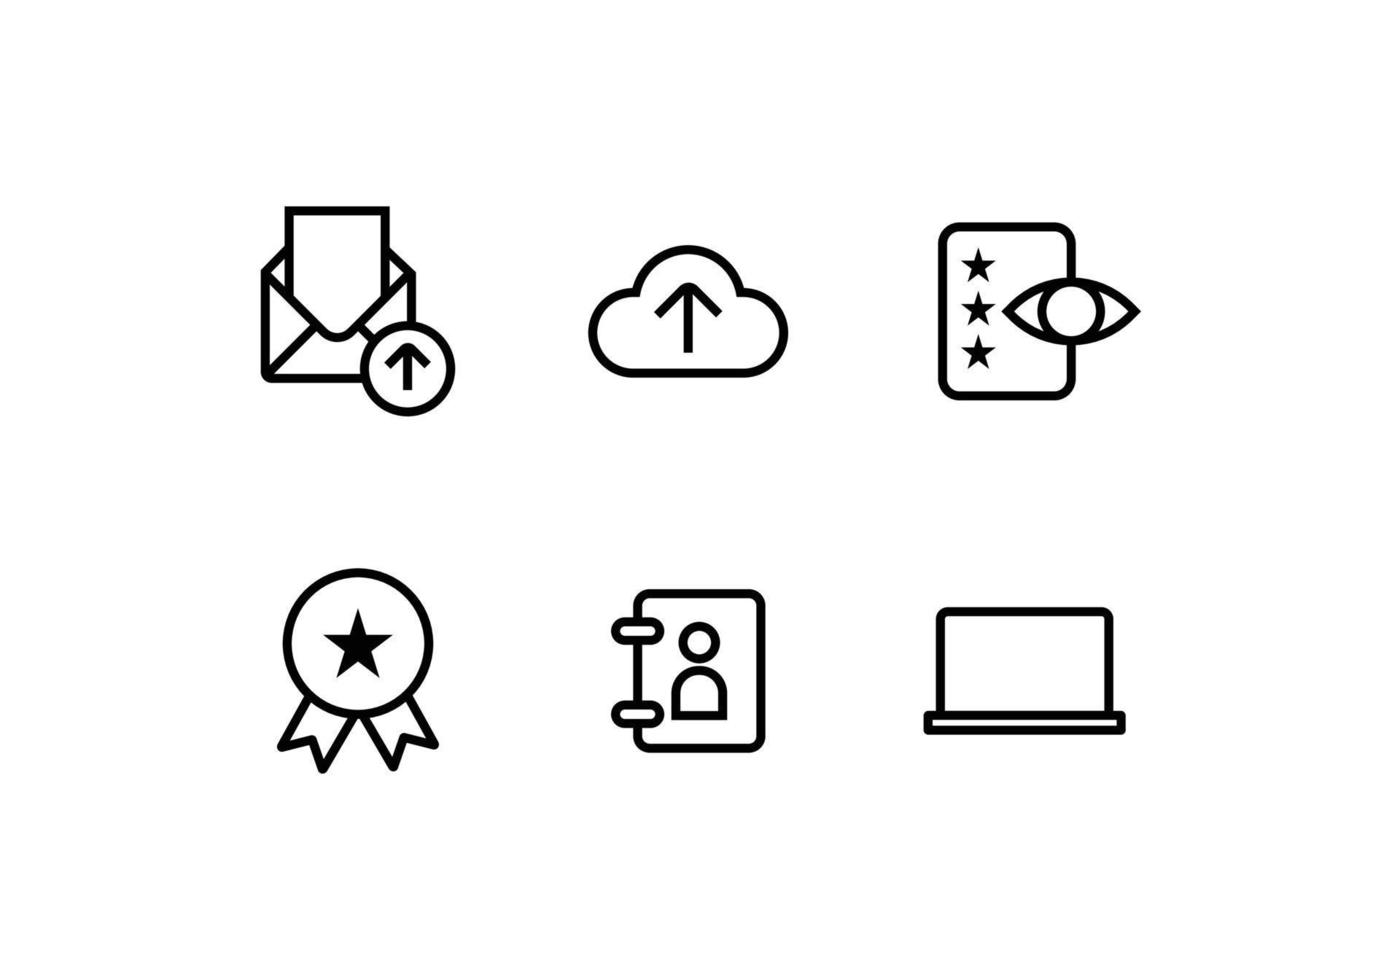 icons set collection of digital network and communication. mail, rating, review, cloud, contact, and computer symbols. simple icons set in uncolored style. vector